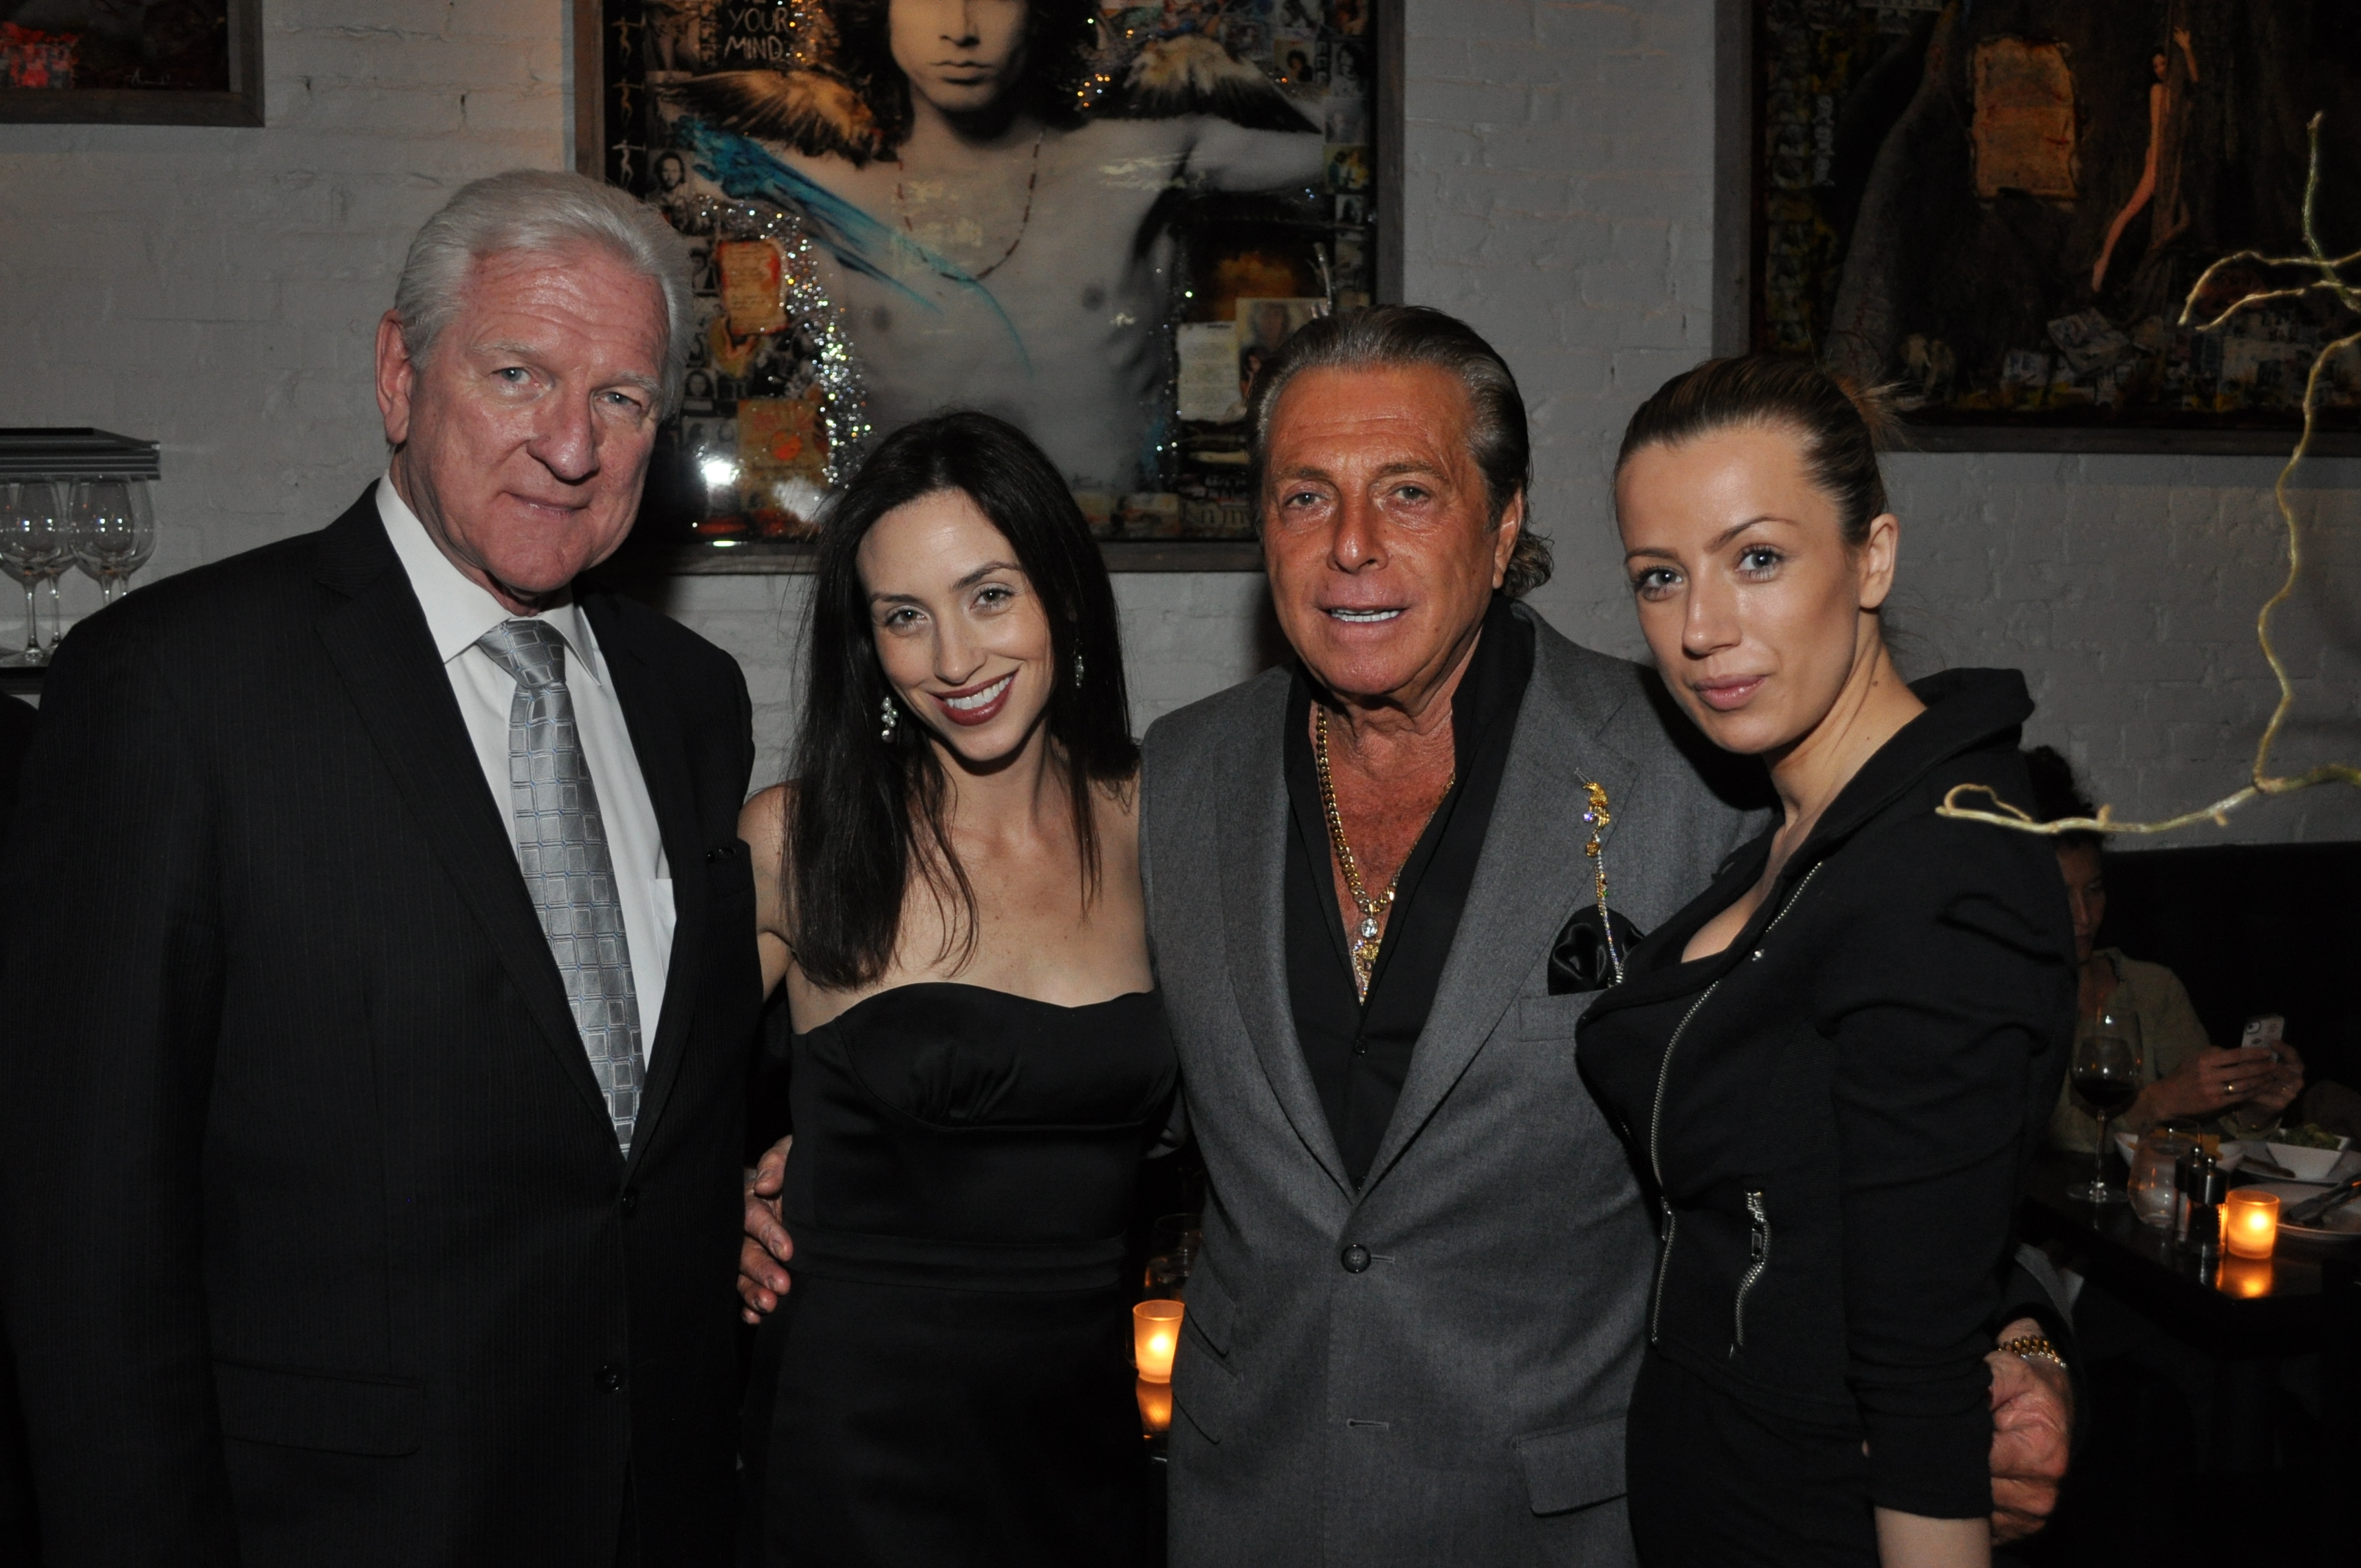 New York SOHO Entertainment Group Event with Gregory M. Brown, Rachel Barrer, Gianni Russo, and Sanja Bestic